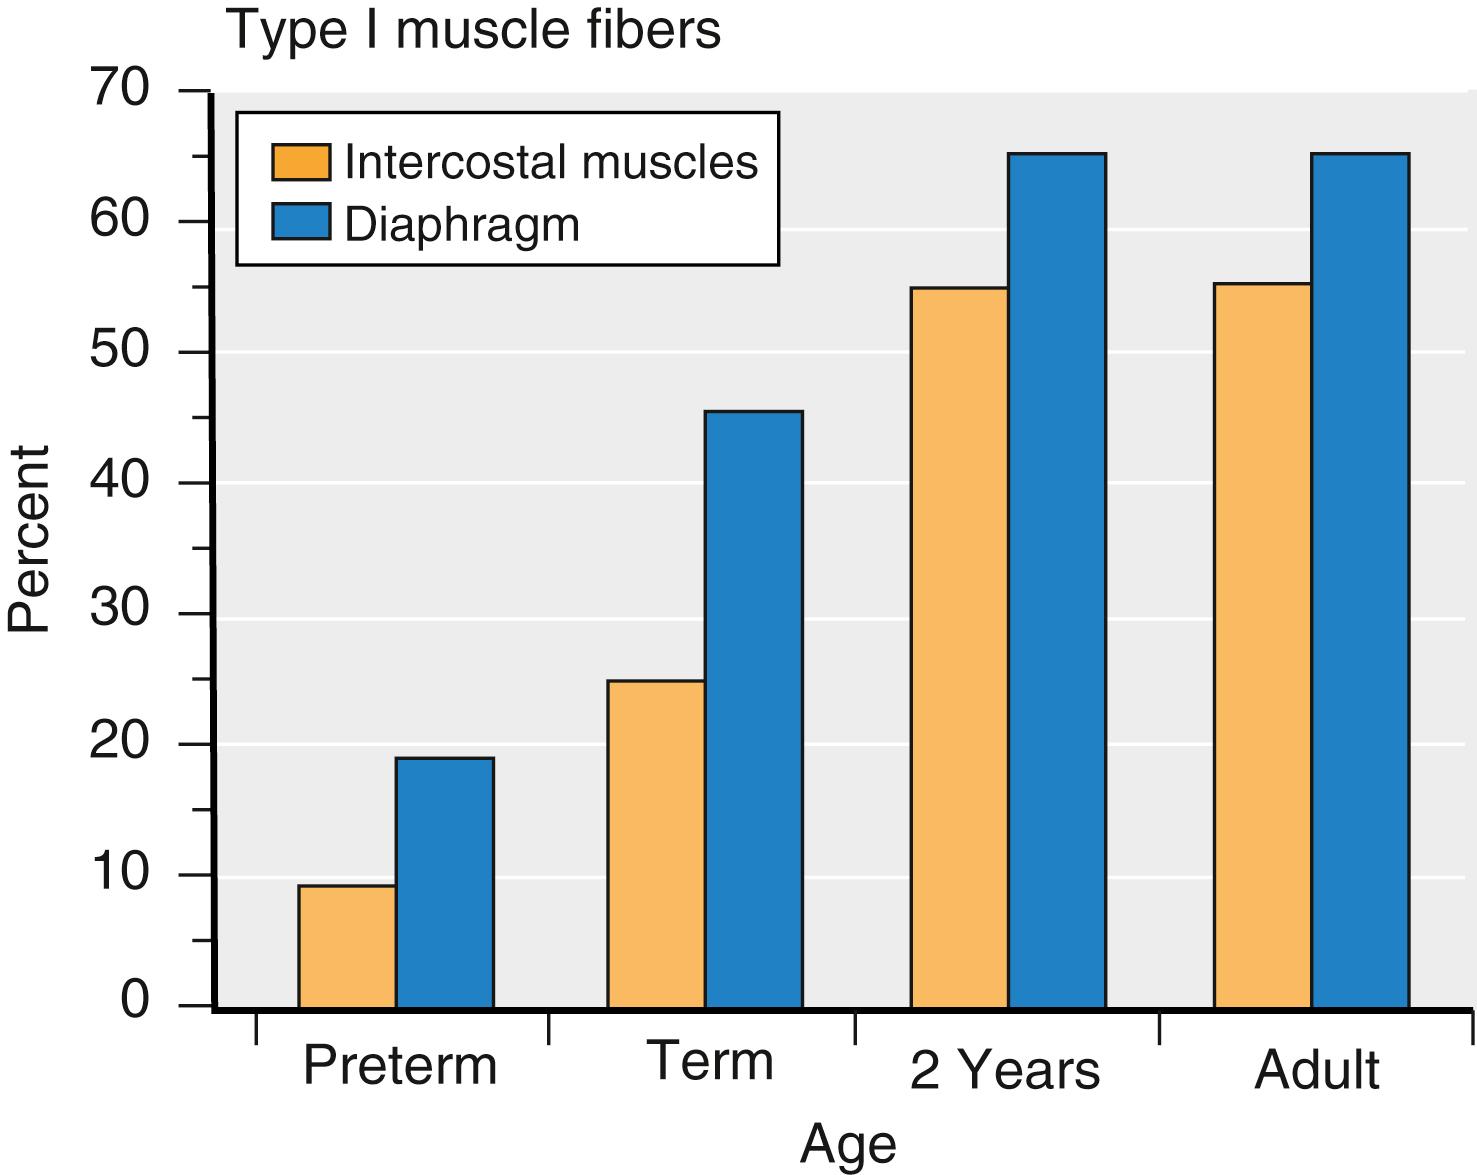 Fig. 77.2, The composition of the diaphragm and intercostal muscles significantly changes during the first 2 years of life. The number of type I muscle fibers is inversely related to age and may account, in part, for the ease of inducing respiratory fatigue as the work of breathing increases.